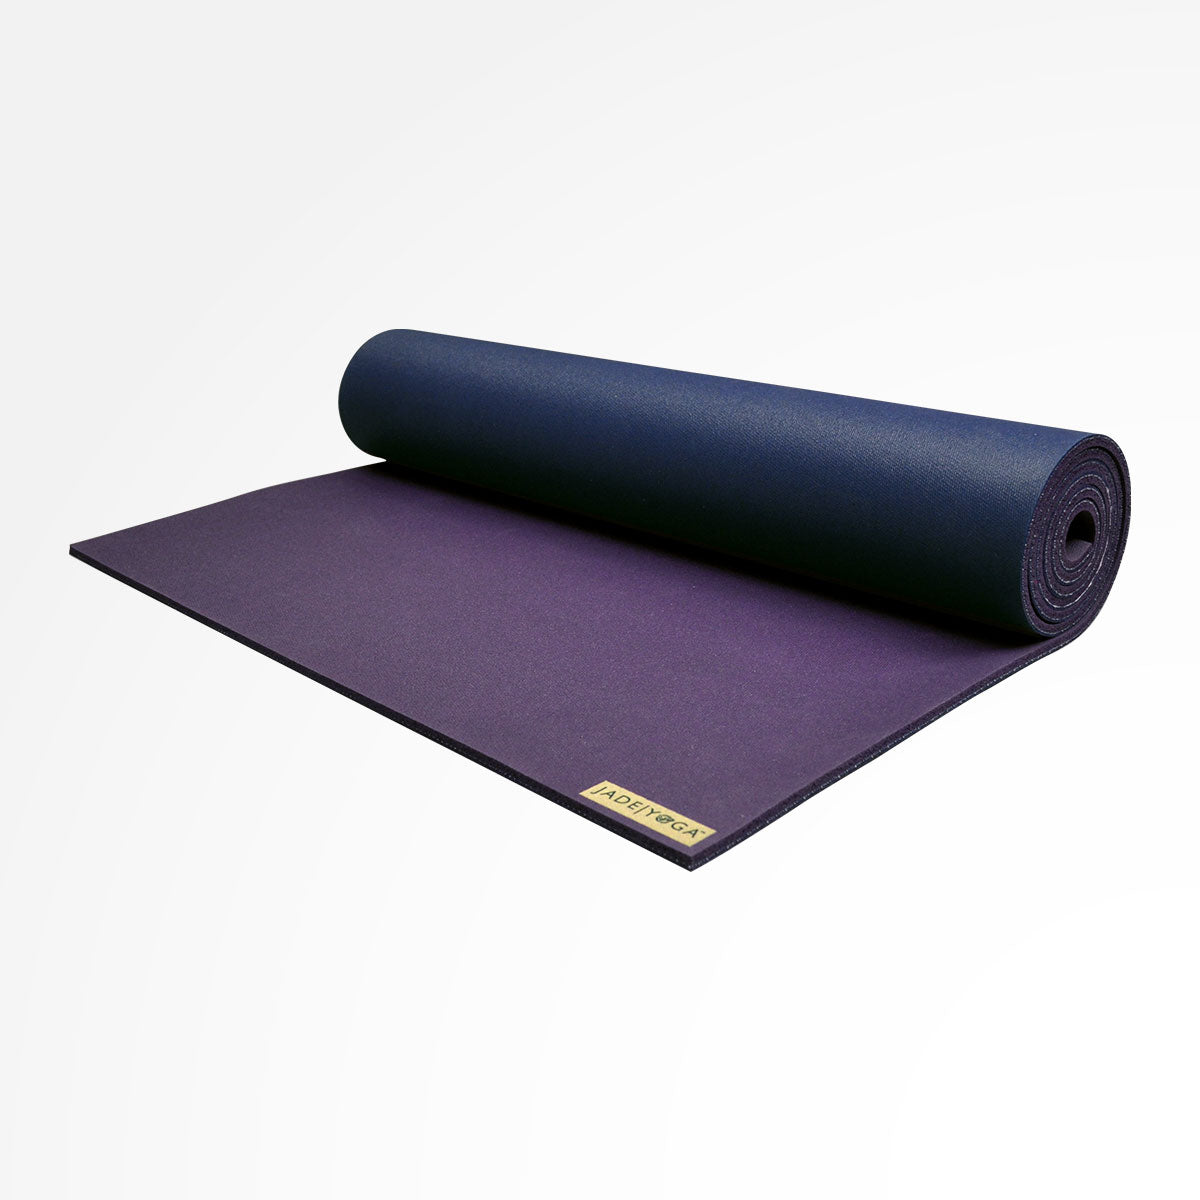 Clever Yoga® Extra Wide Yoga Wheel with Double Padding - Pick Your Plum